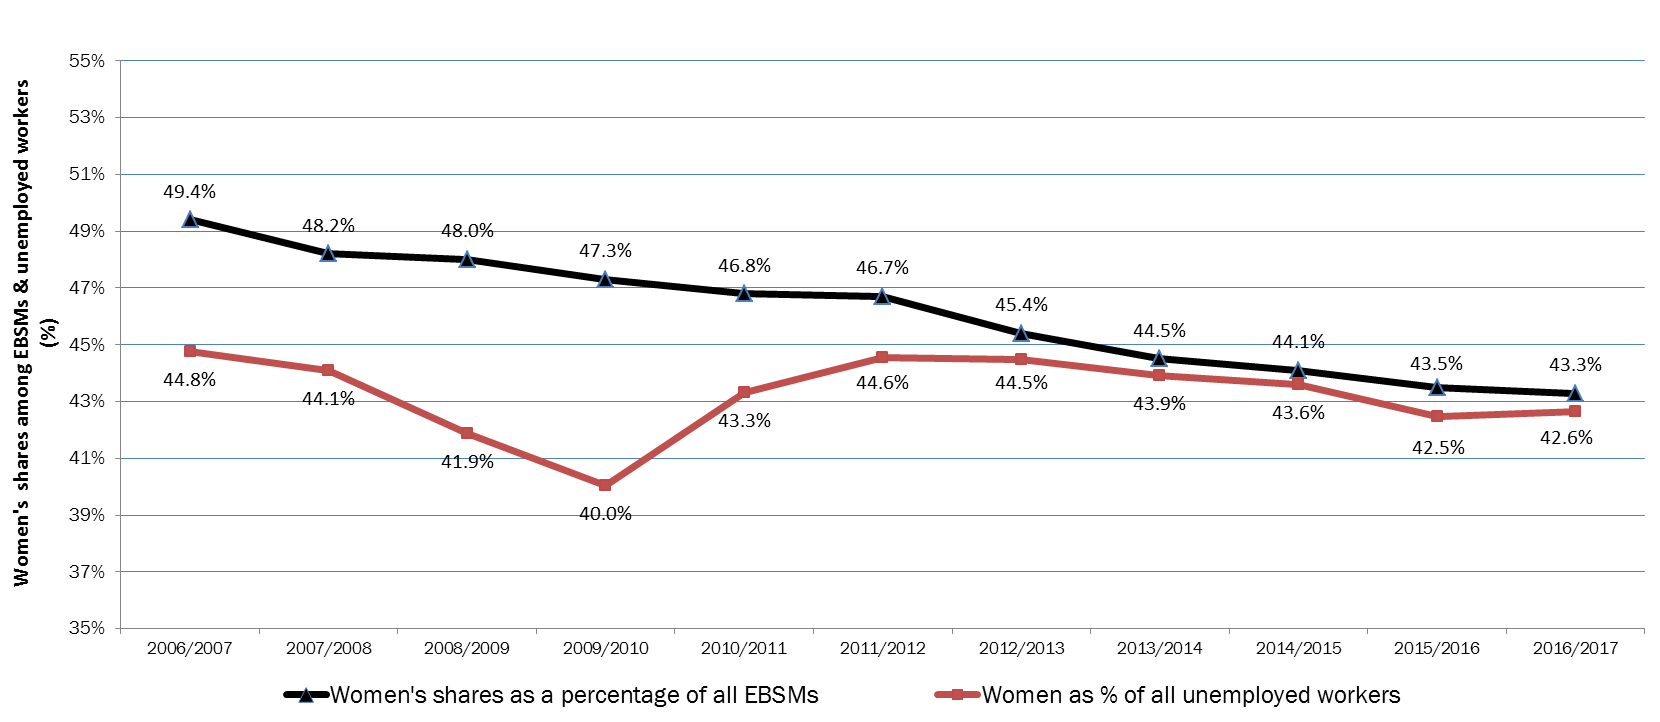 Chart 4 - Women participation in EBSM interventions (%) relative women's labour market indicators, Canada (2006/2007 to 2016/2017)